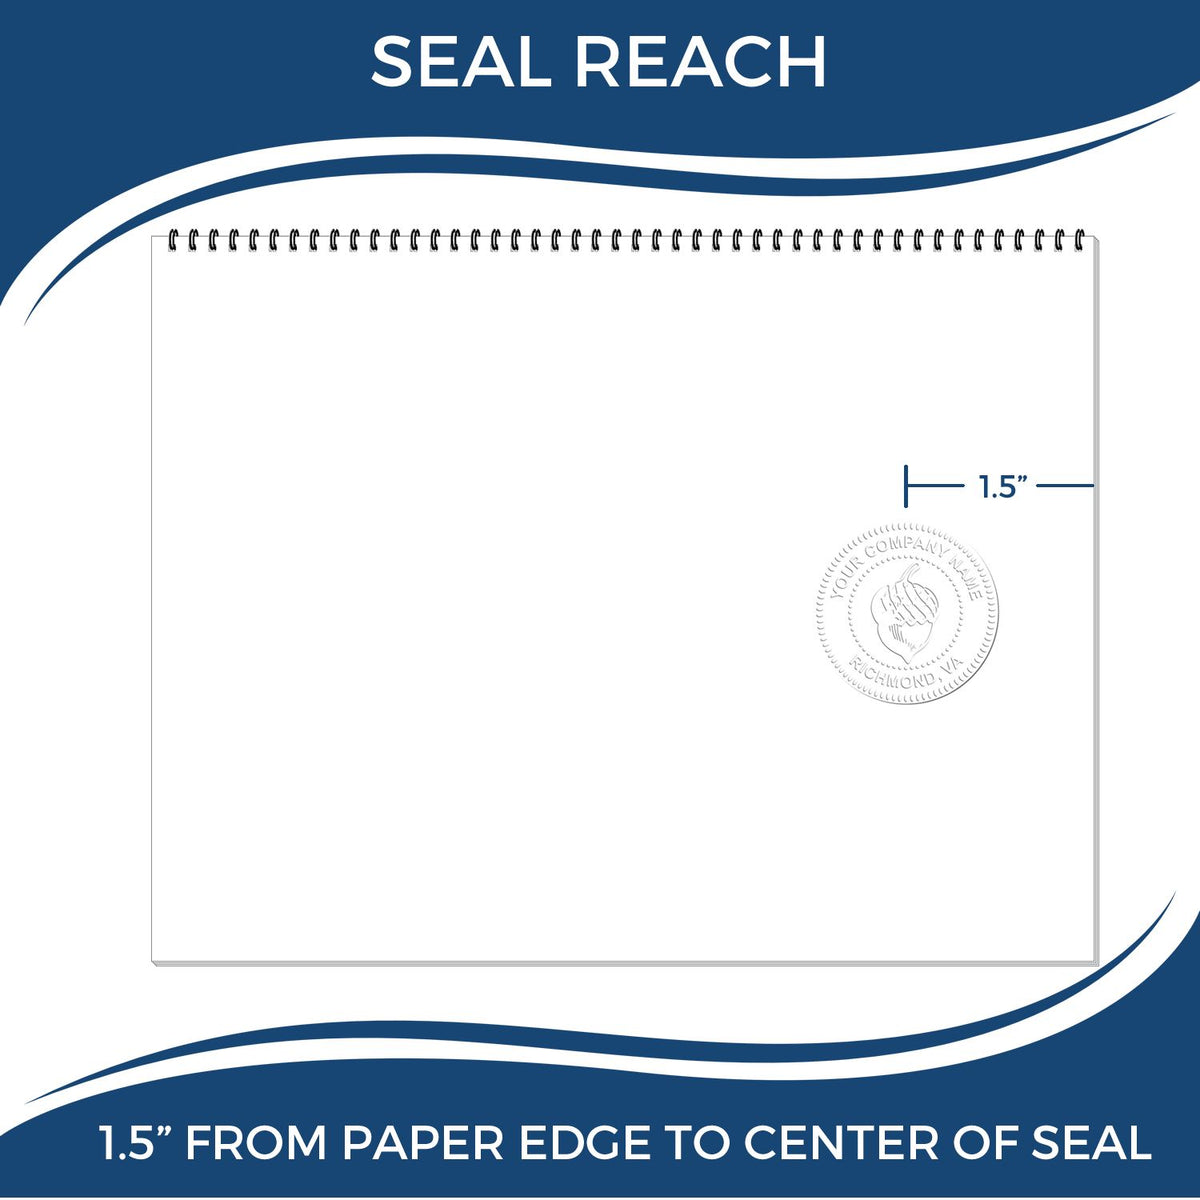 An infographic showing the seal reach which is represented by a ruler and a miniature seal image of the Hybrid Hawaii Engineer Seal